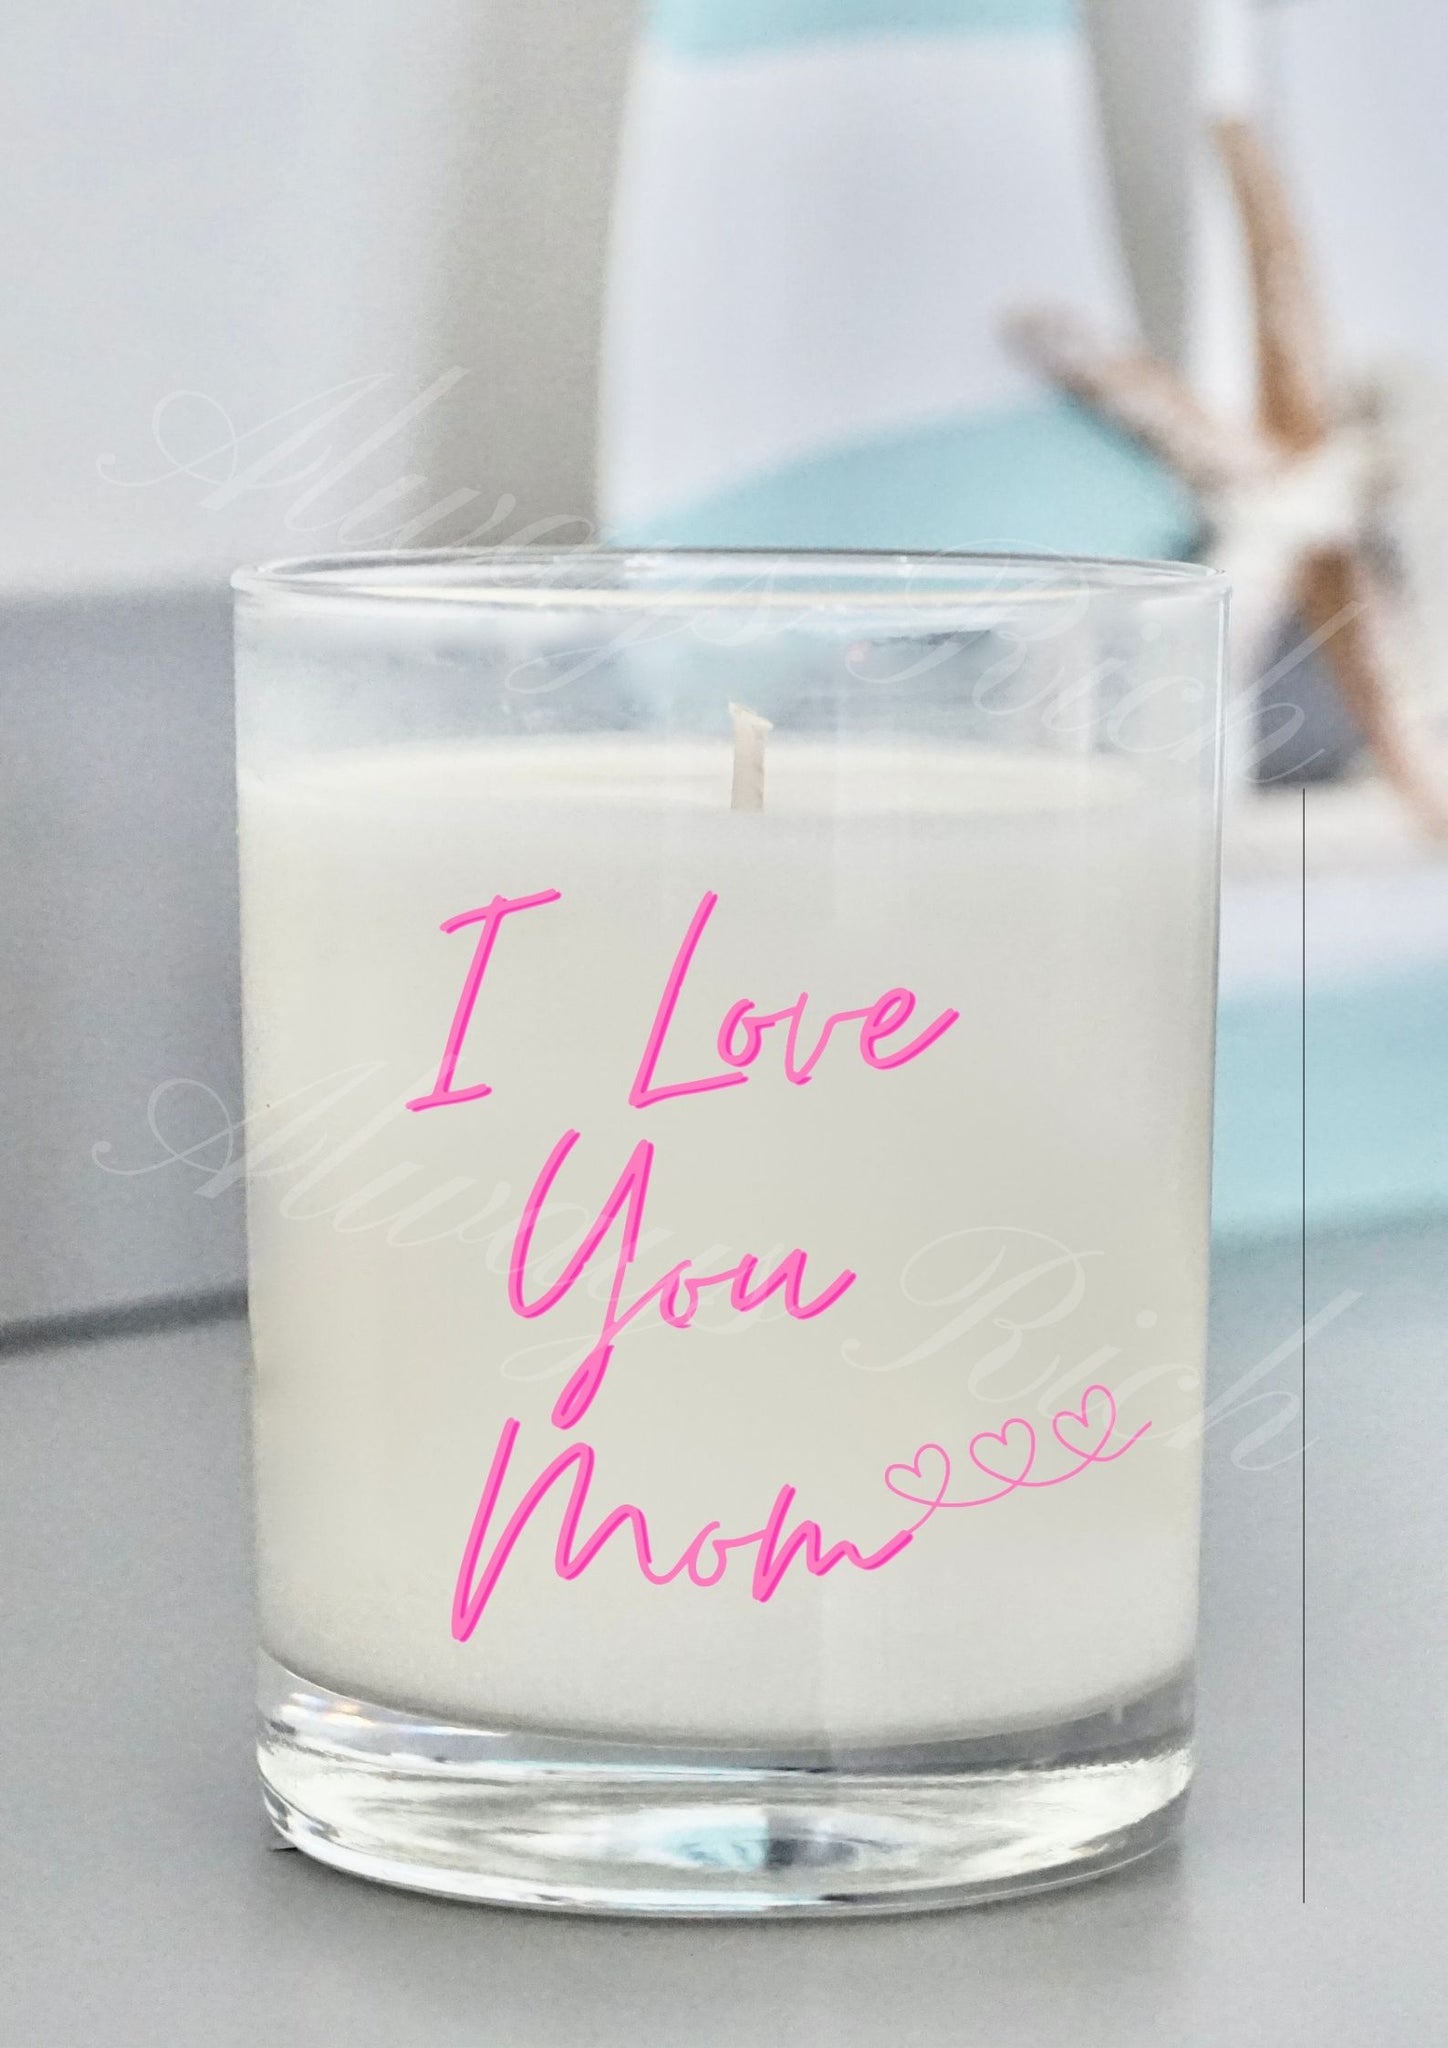 I Love You Mom Scented Candle